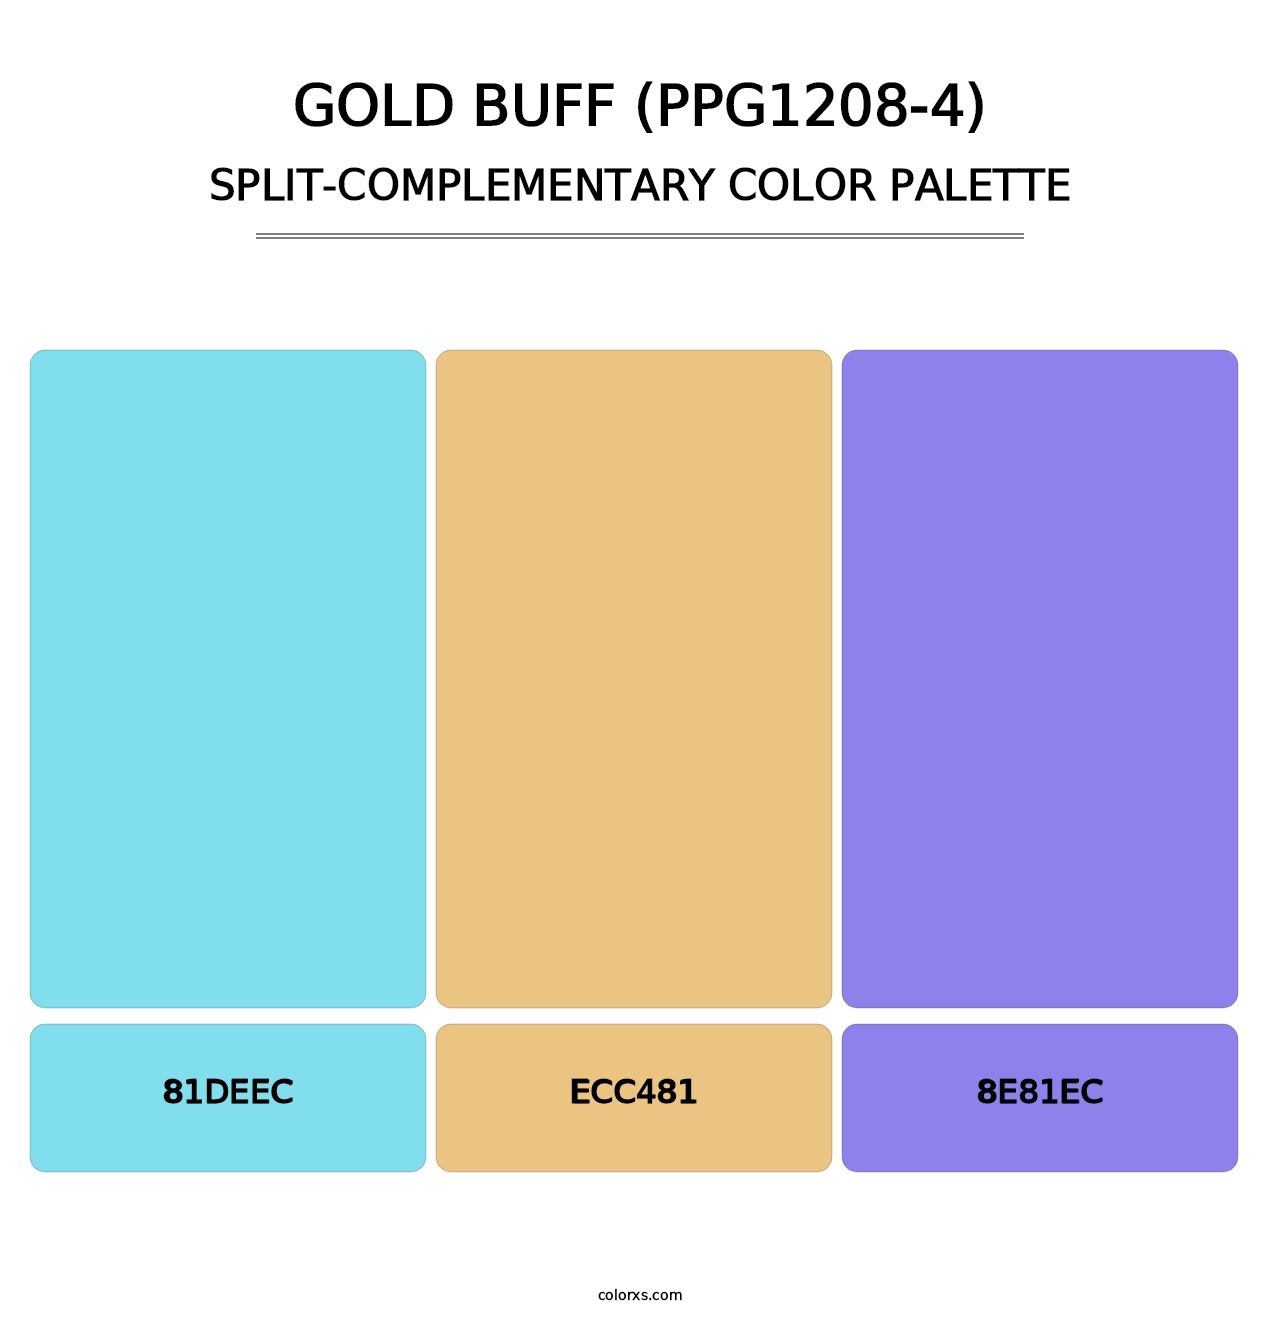 Gold Buff (PPG1208-4) - Split-Complementary Color Palette